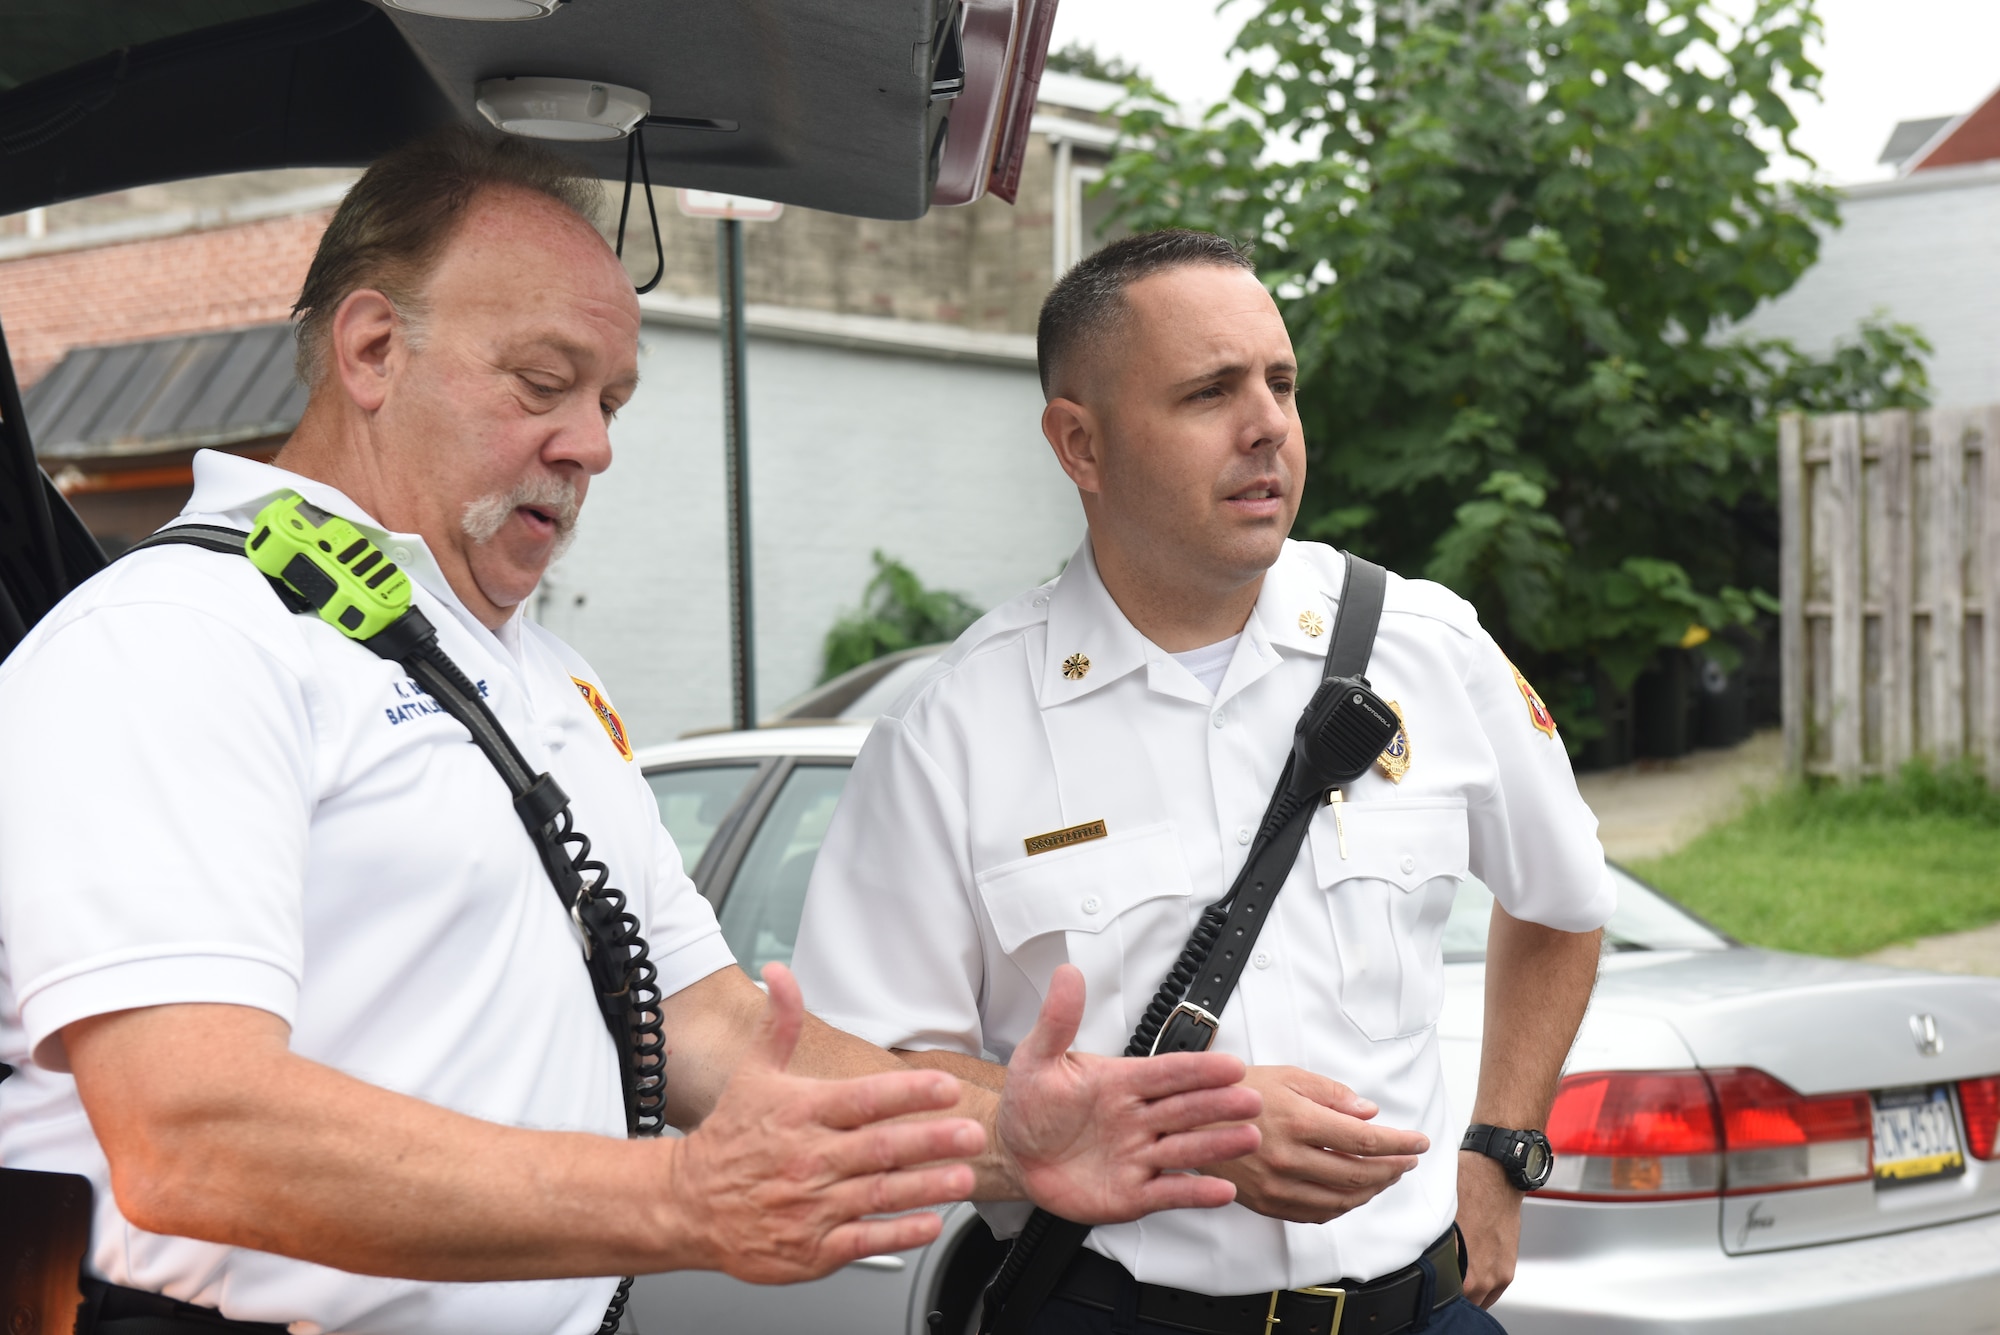 Scott Little, right, fire chief of Lancaster’s Bureau of Fire, gets briefed on the scene of a gas leak by the on-scene battalion chief Aug. 21, 2018, Lancaster, Pennsylvania. A pipe was struck during road work that created a gas leak, which resulted the road being closed off for hours until it was under control. (U.S. Air National Guard photo by Senior Airman Julia Sorber/Released)